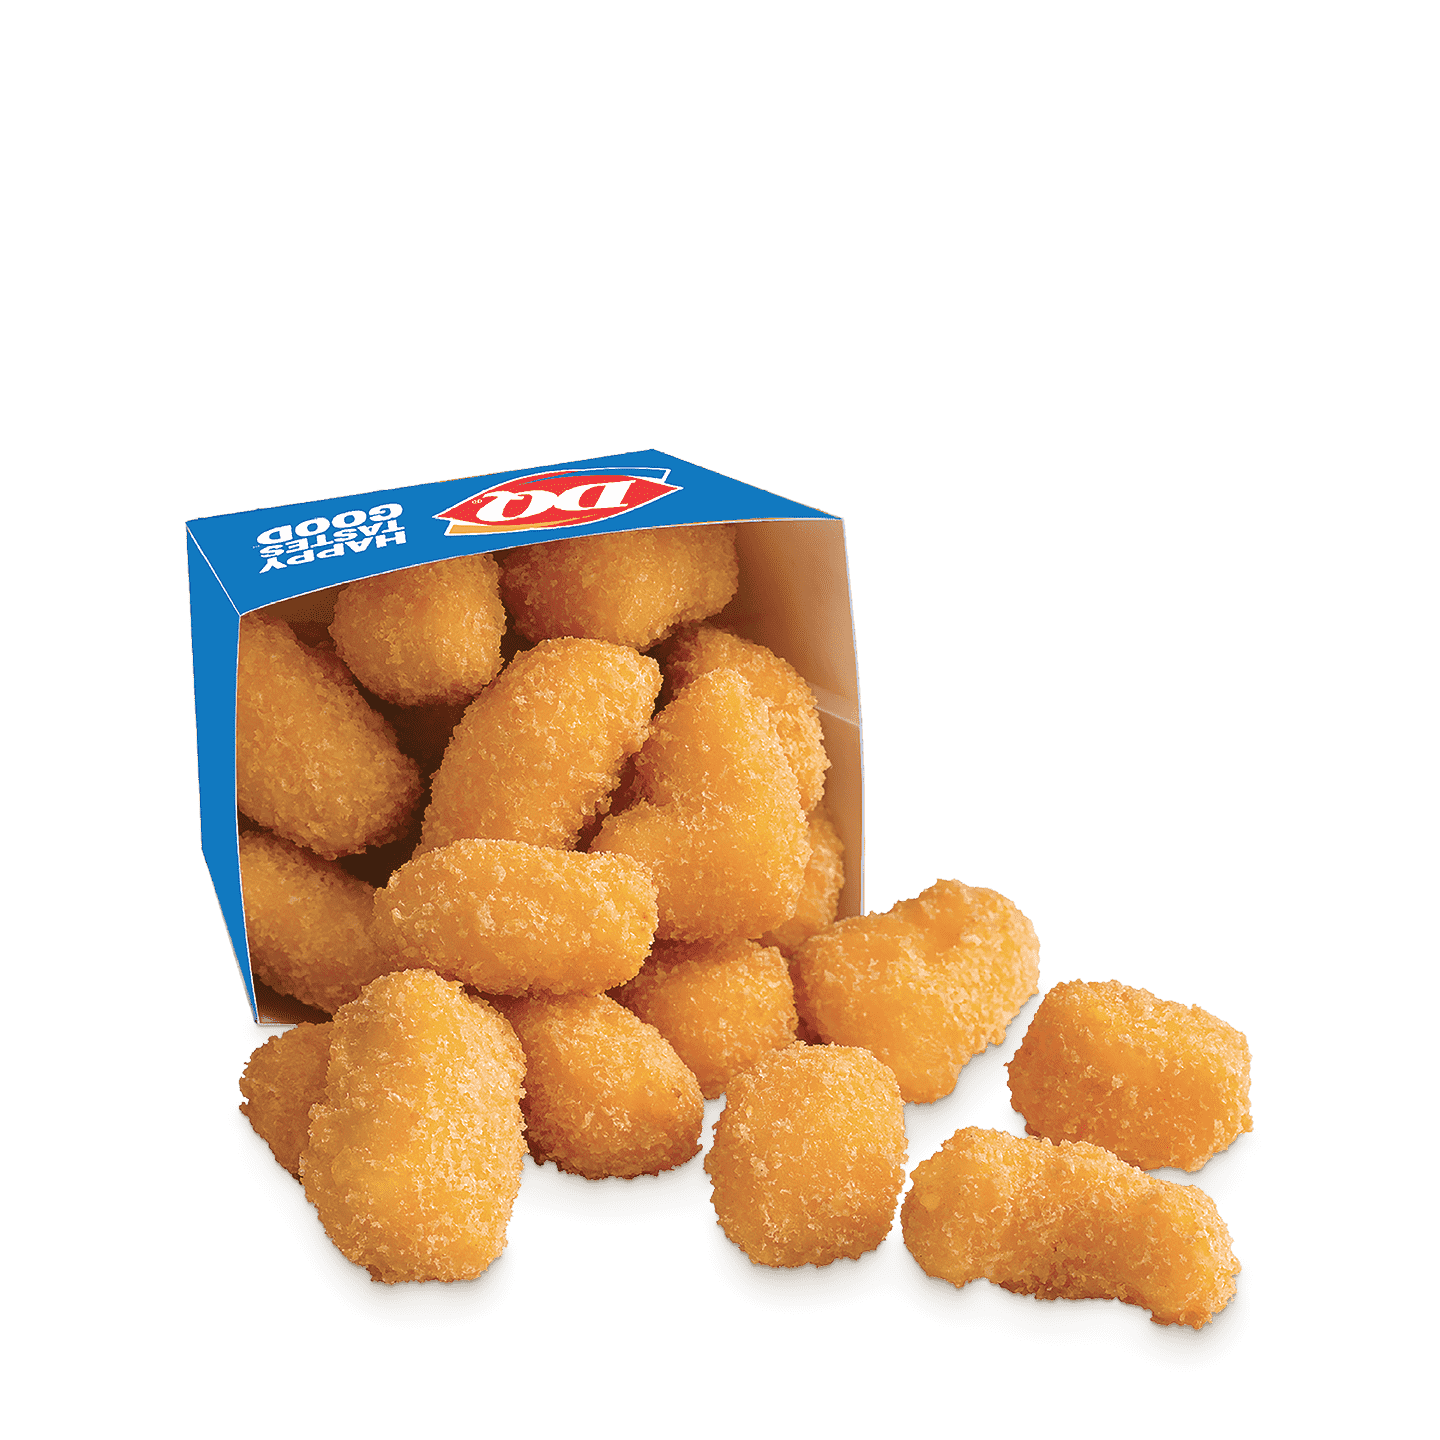 how do i make cheese curds